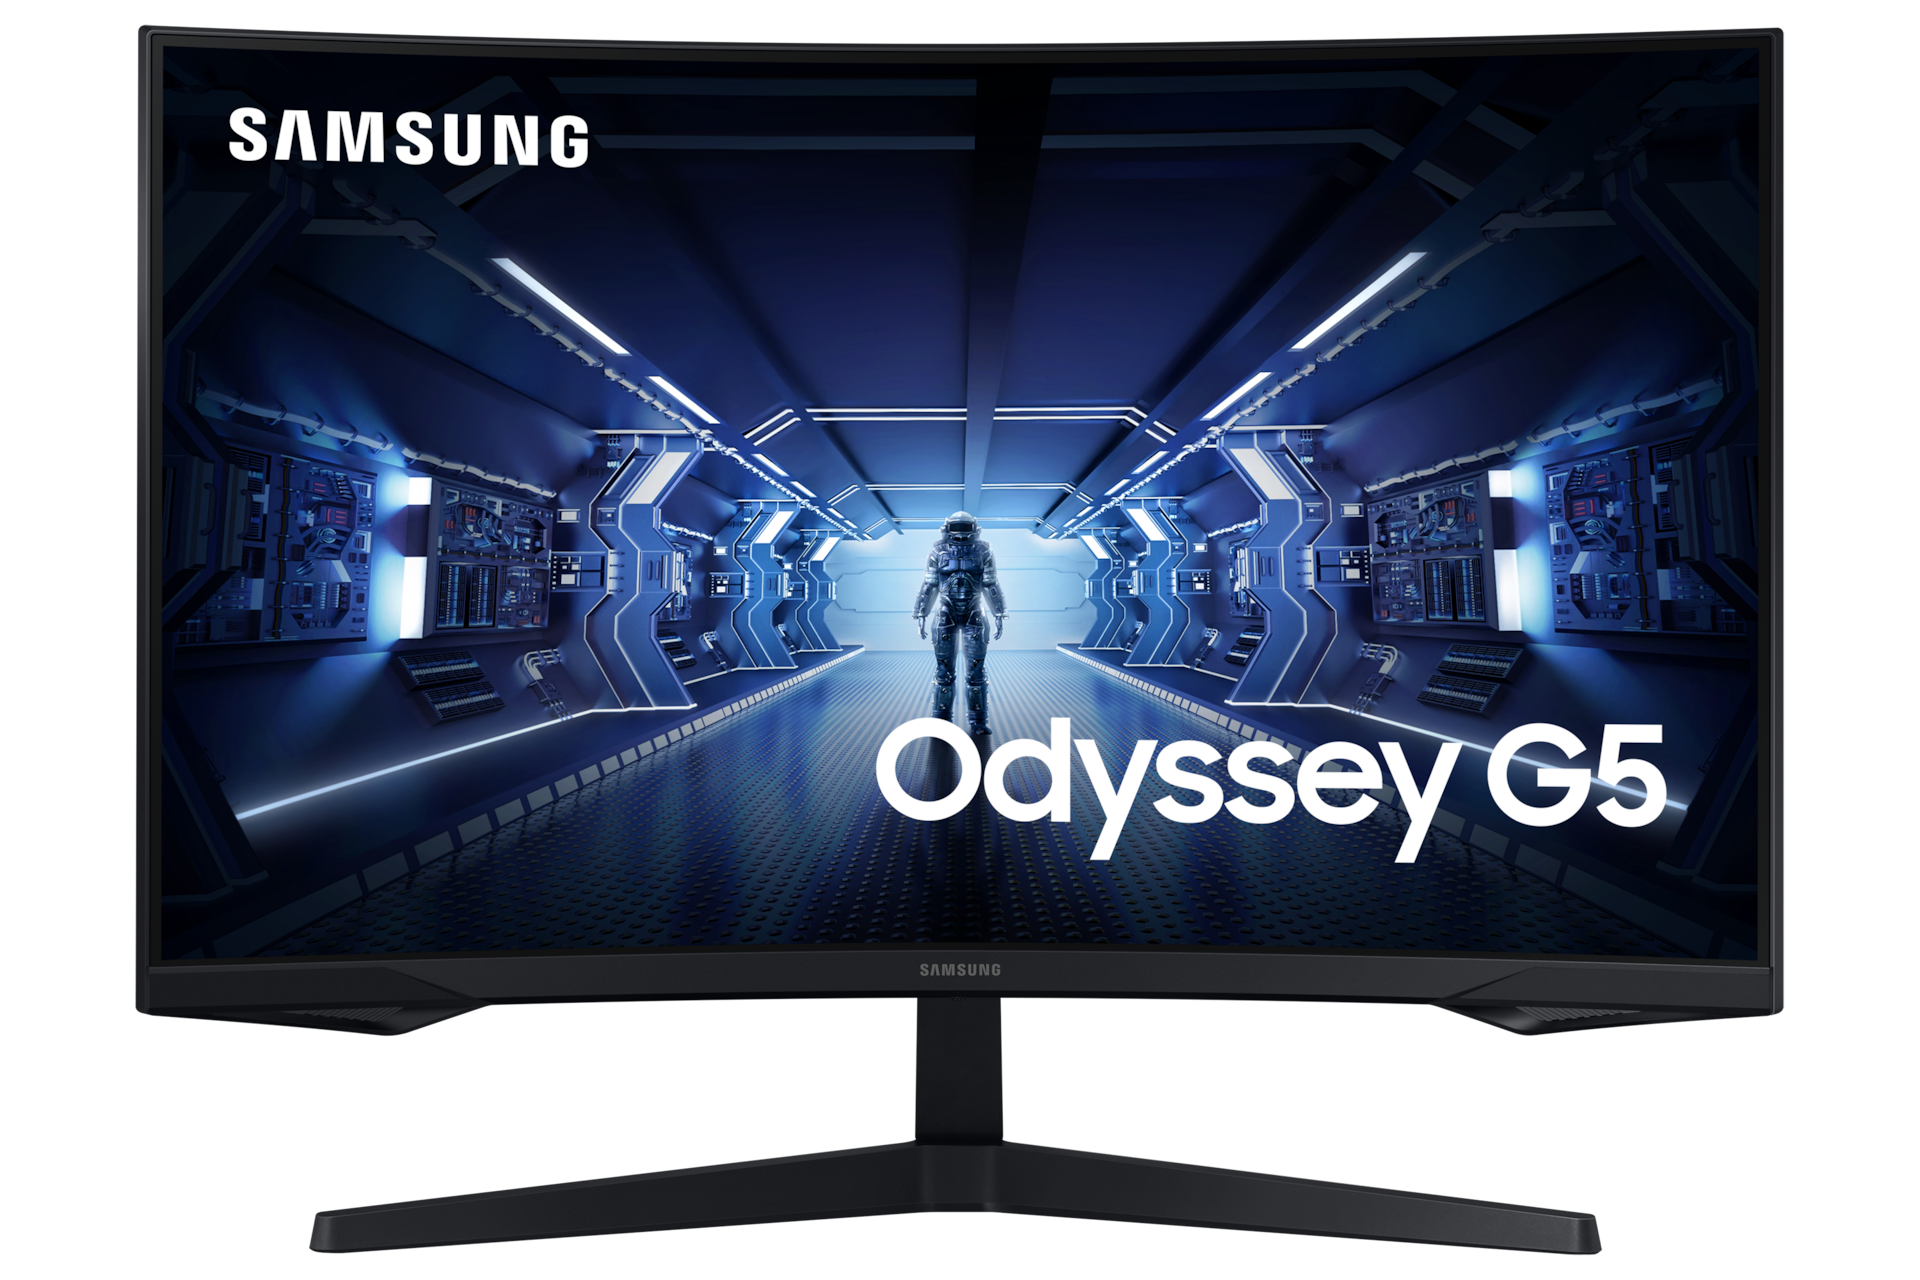 https://images.samsung.com/is/image/samsung/p6pim/be_fr/lc32g55tqwrxen/gallery/be-fr-odyssey-g5-351313-lc32g55tqwrxen-414048278?$650_519_PNG$